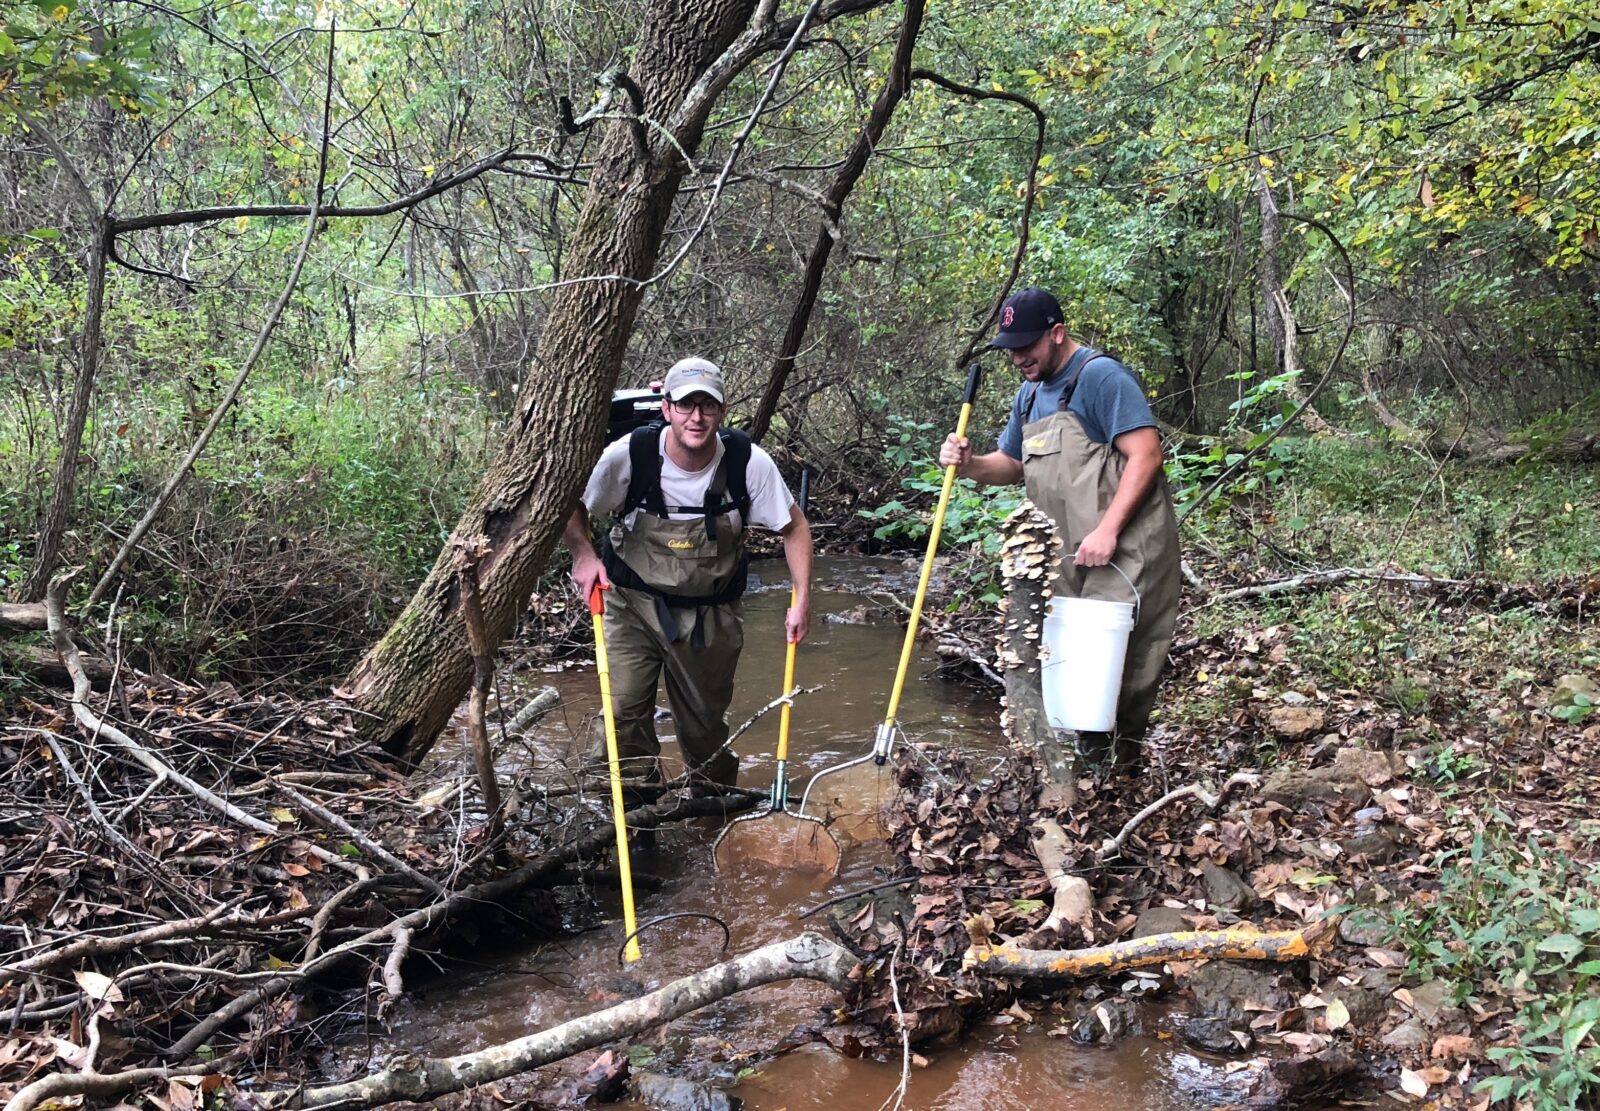 An image of two men electrofishing in a small creek using the backpack equipment which is the same as on the boat but more transportable.